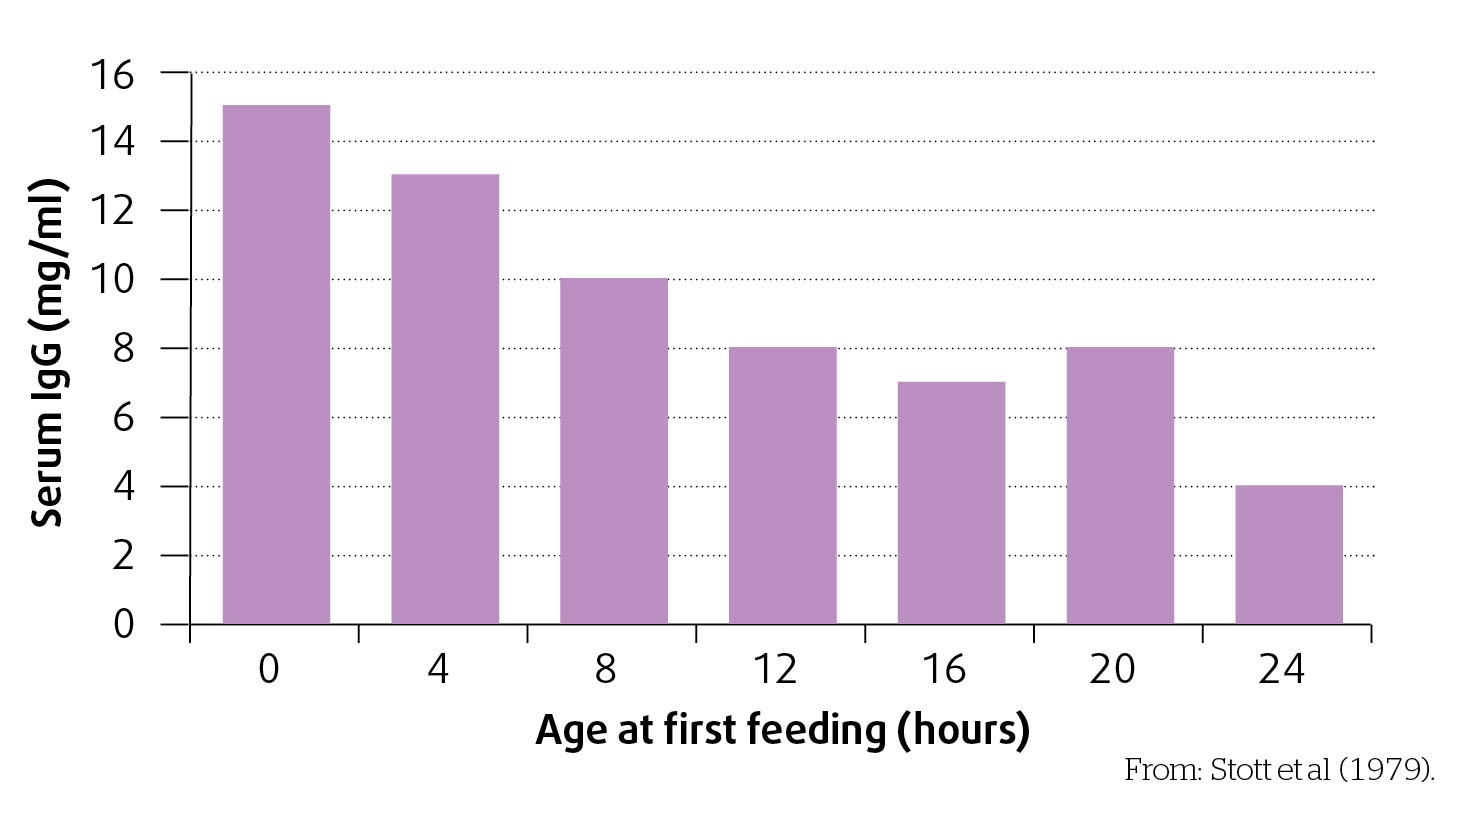 Figure 5. The earlier a calf is fed colostrum, the higher its immunoglobulin levels.